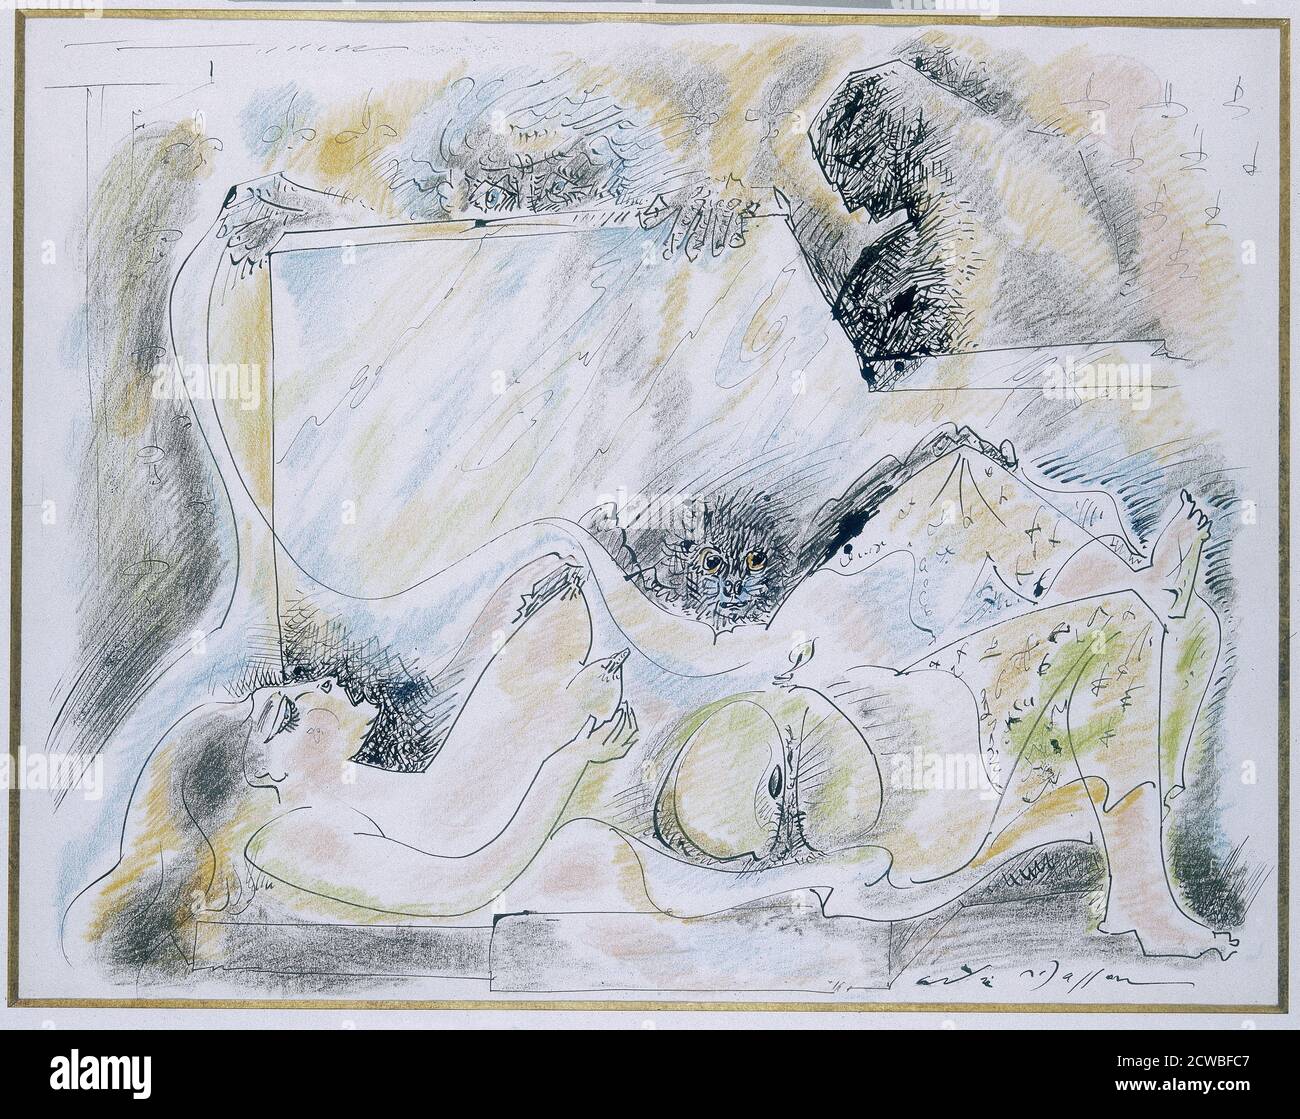 Andre Masson 'La Naissance D'Eve,' Surrealist Lithograph from 'Je Reve' signed by Andre Masson. 1975 Stock Photo